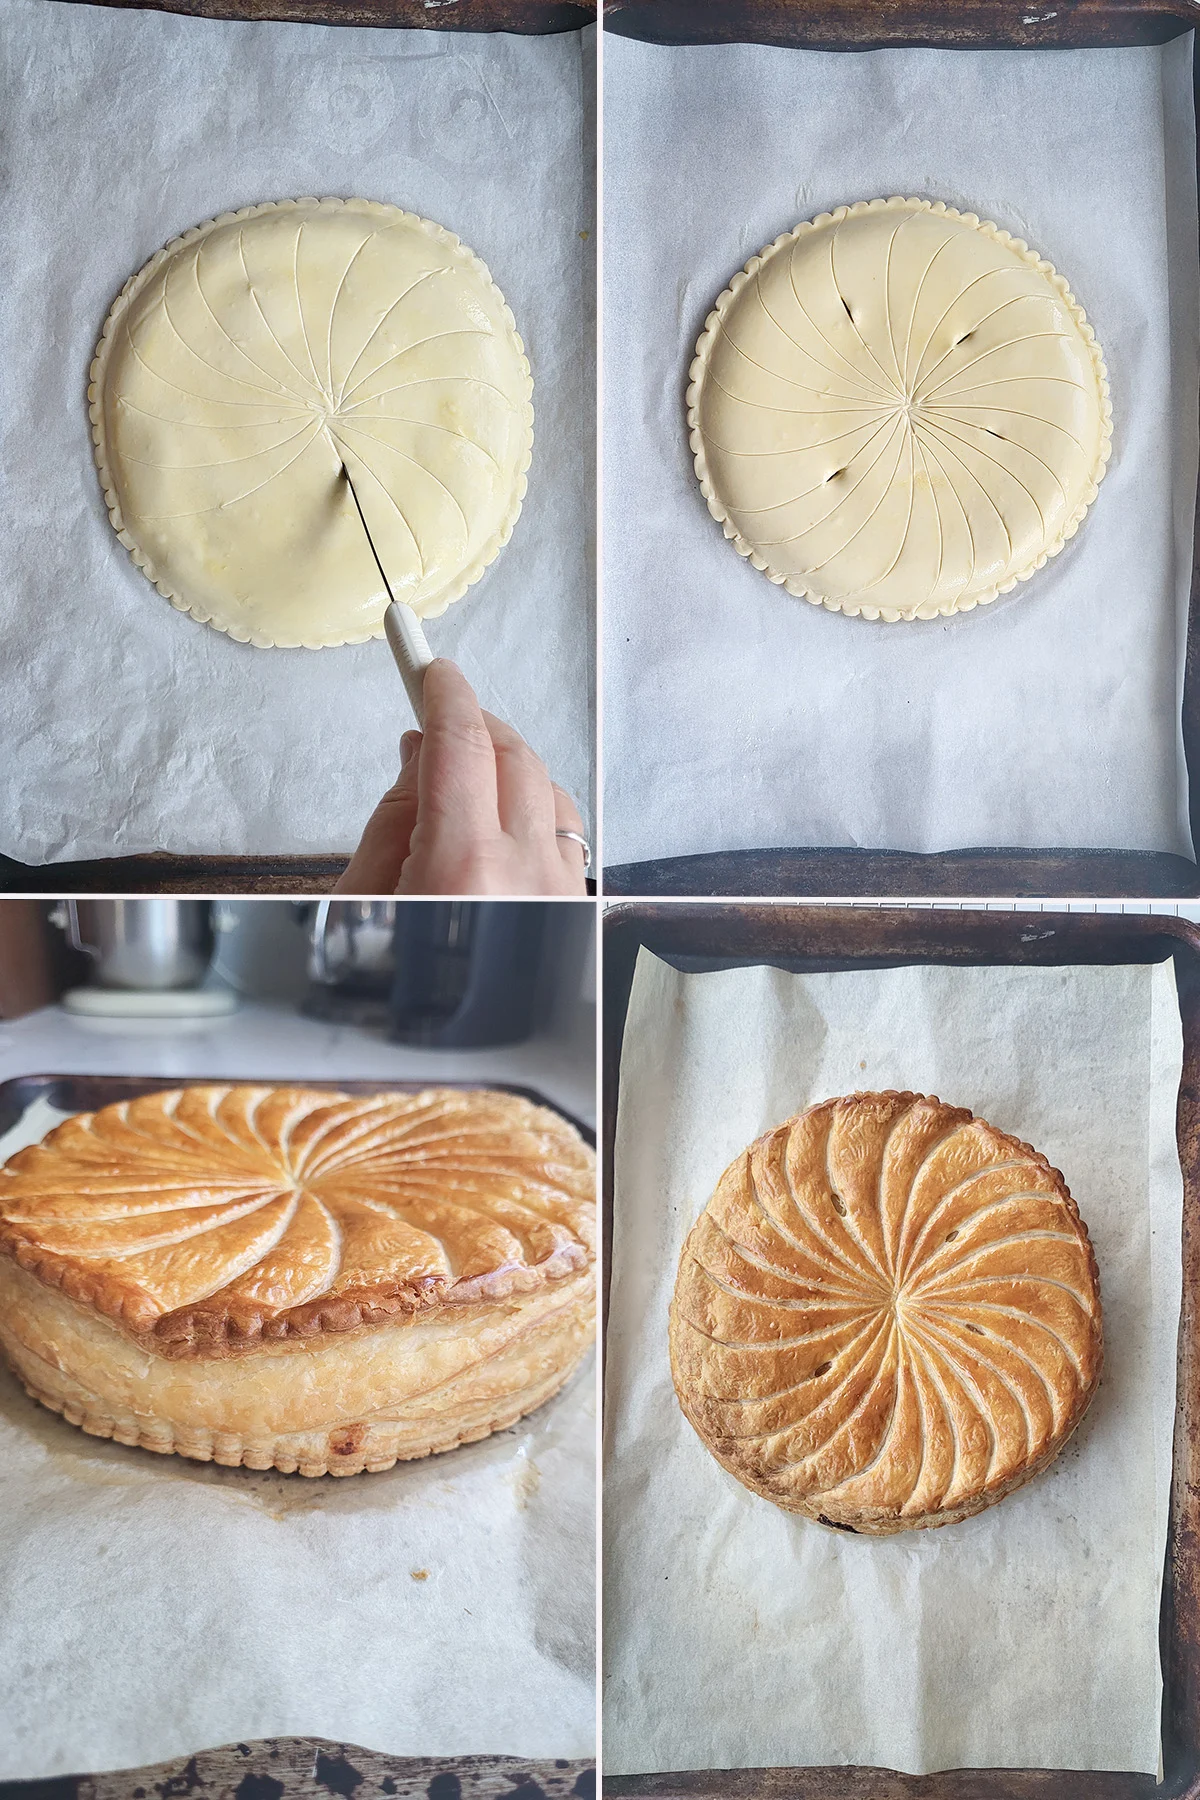 Etching lines on a galette with a knife. A baked galette on a tray.